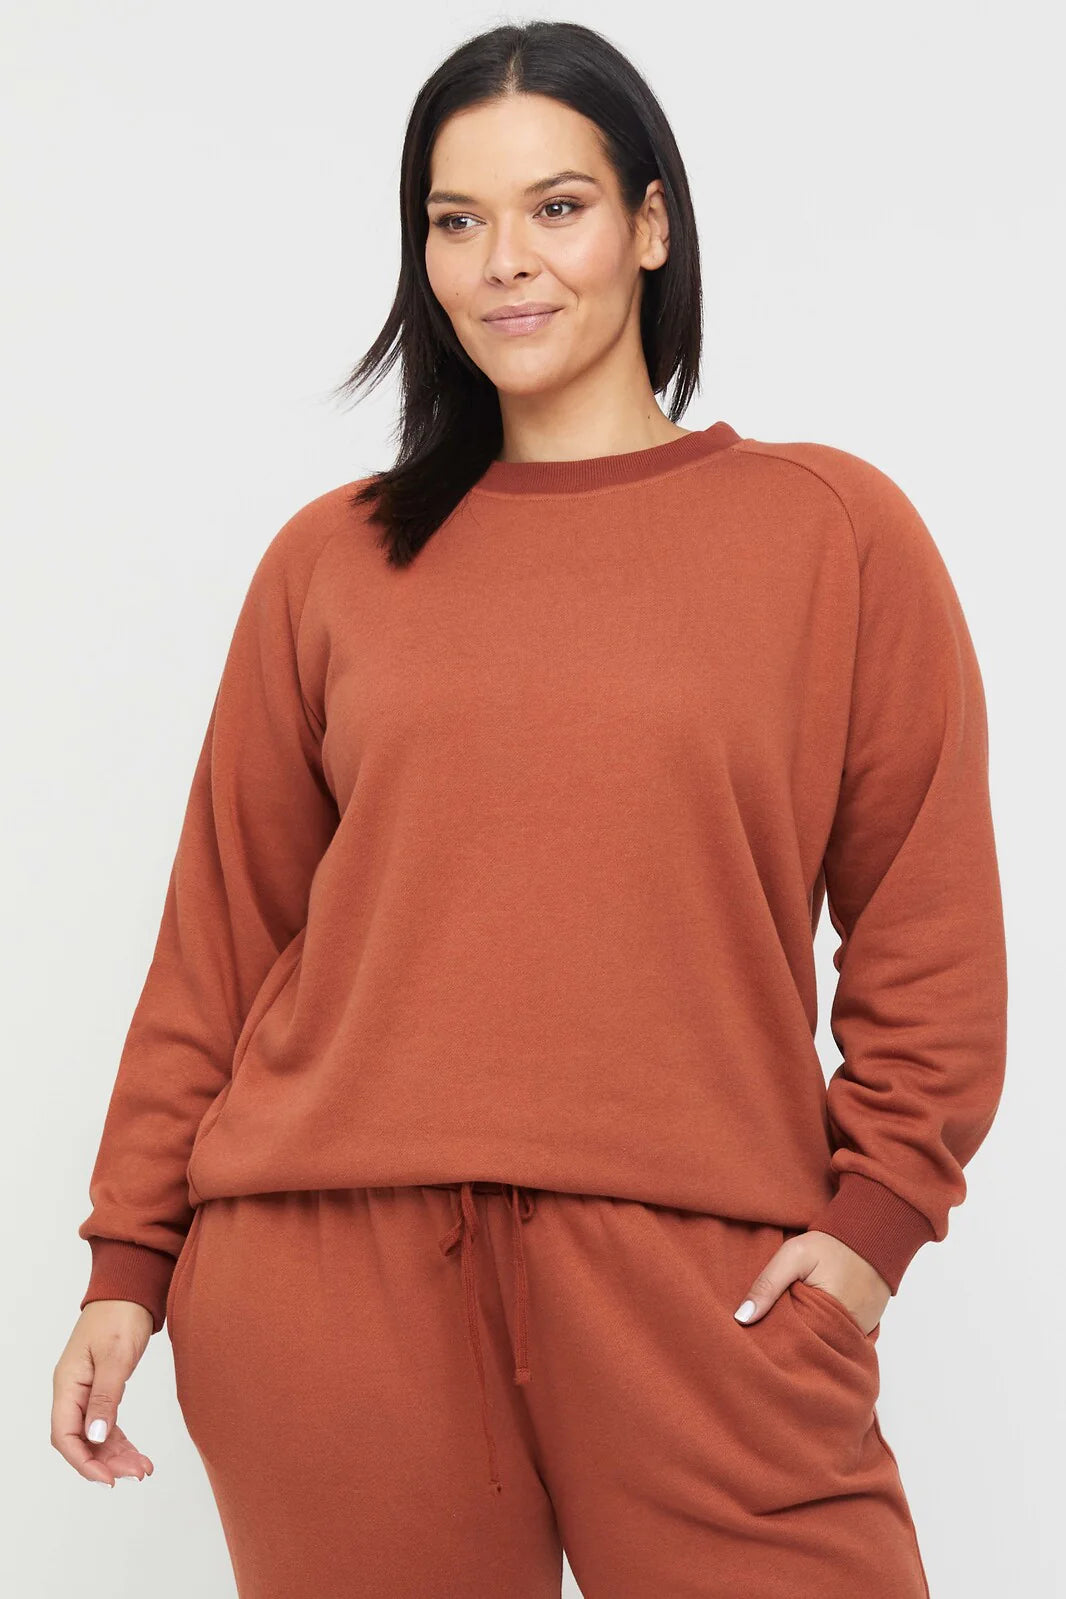 "Luxurious bamboo women's clothing: Rust jumper offers buttery softness and eco-friendly style."